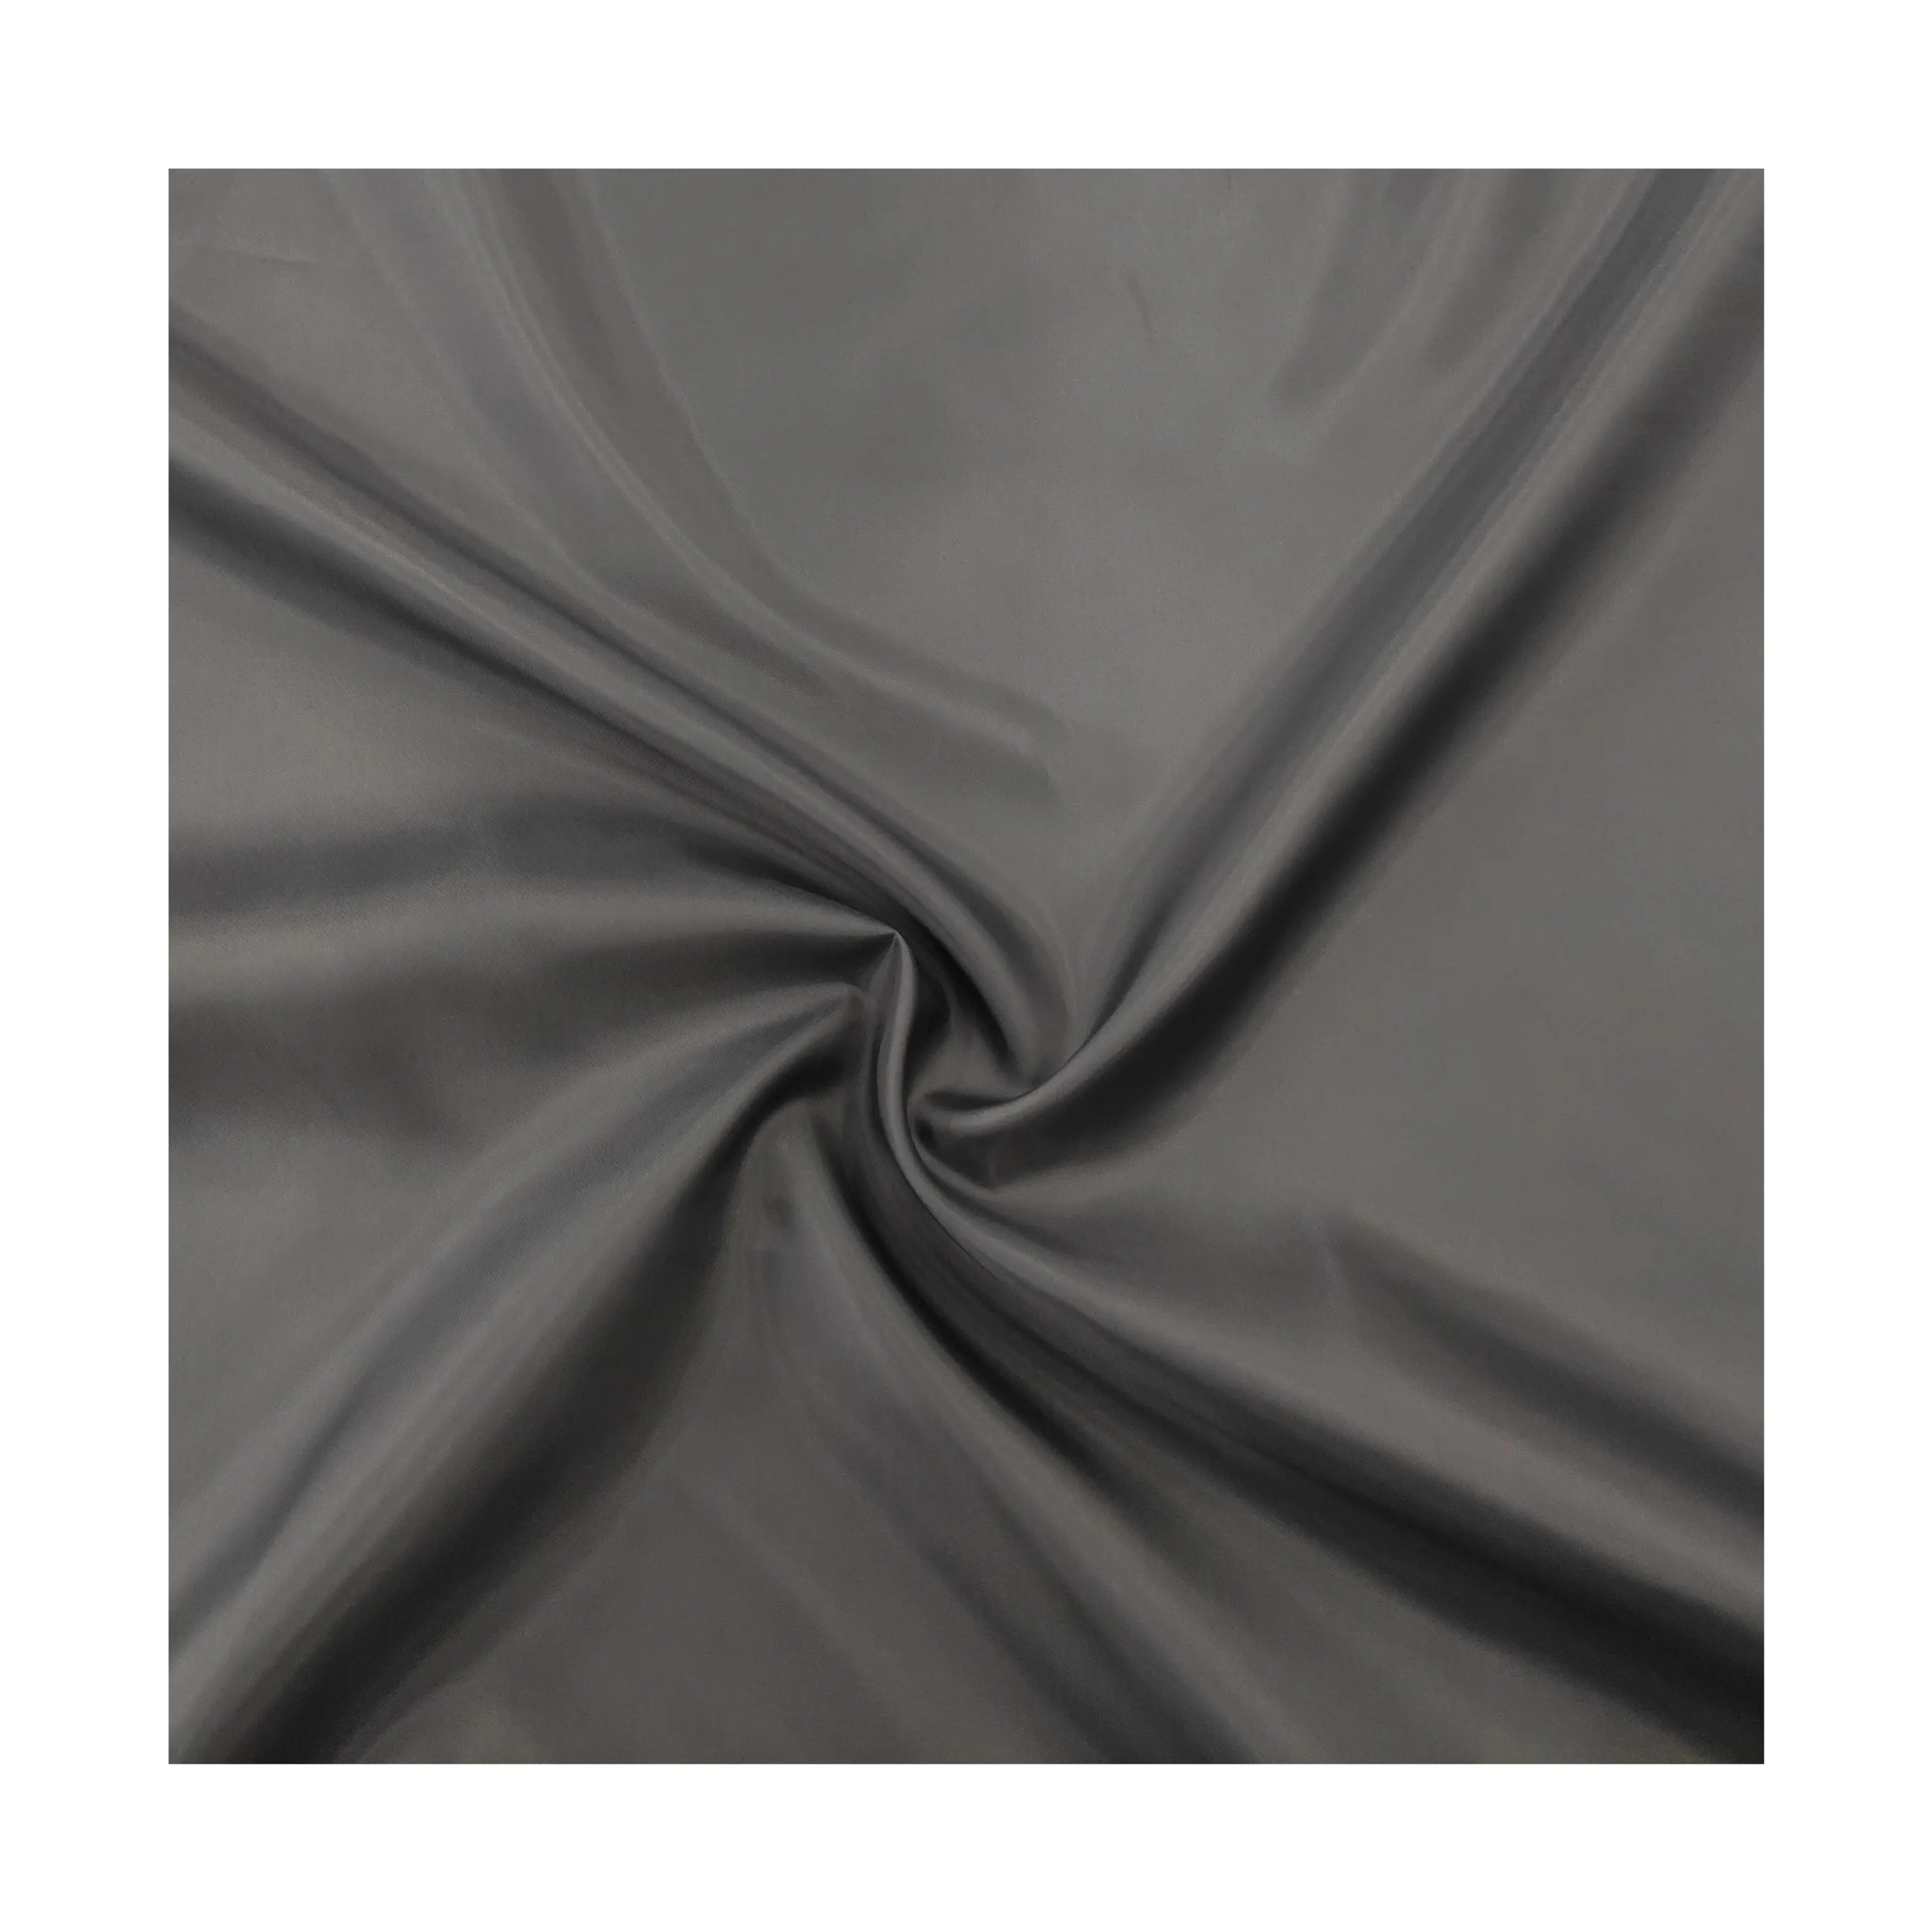 170T Taffeta 40GSM Dyed 100% Polyester Taffeta Lining Fabric For Bedding Bed Sheet And Bags